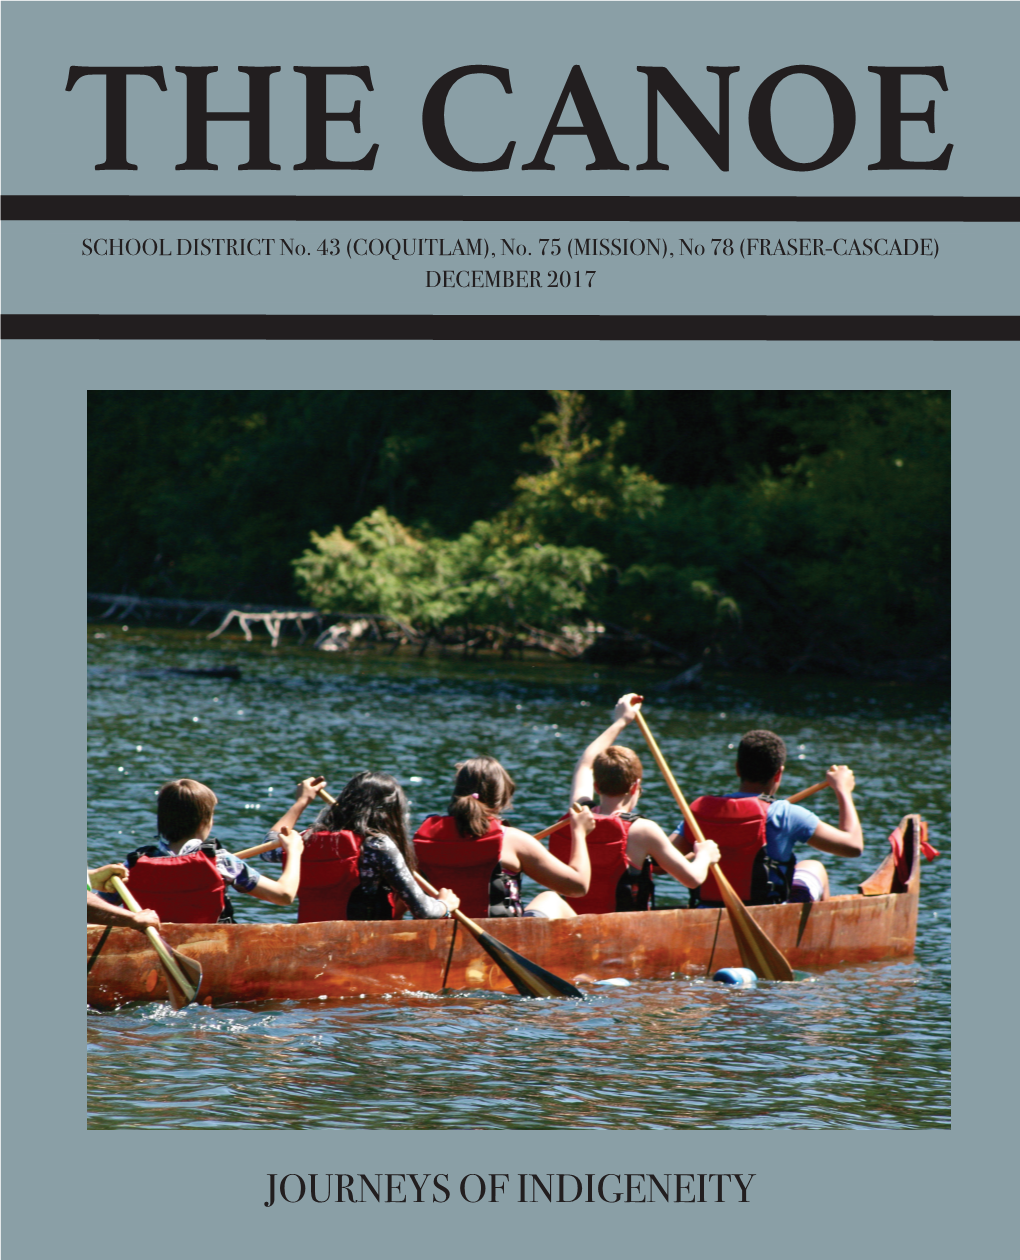 JOURNEYS of INDIGENEITY This Years Editions of the Canoe Are Dedicated to Truth and Reconciliaton